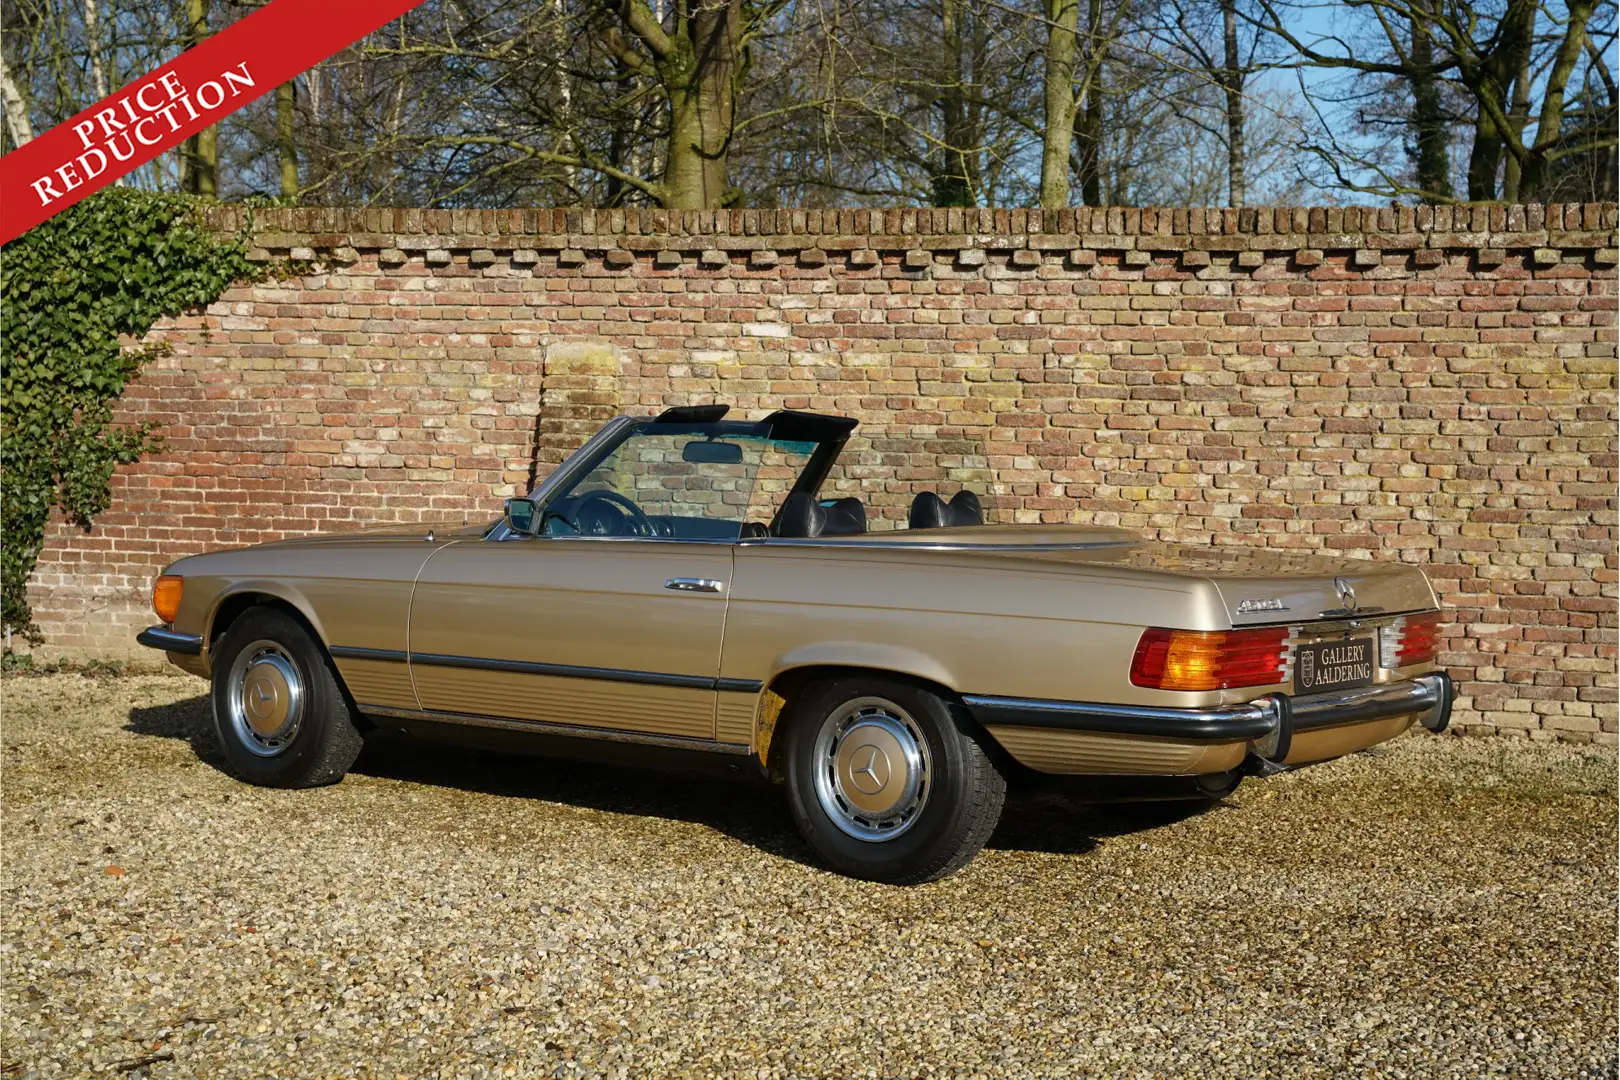 Mercedes-Benz SL 450 PRICE REDUCTION! Livery in Icon Gold (419) over Bl Zlatna - 2